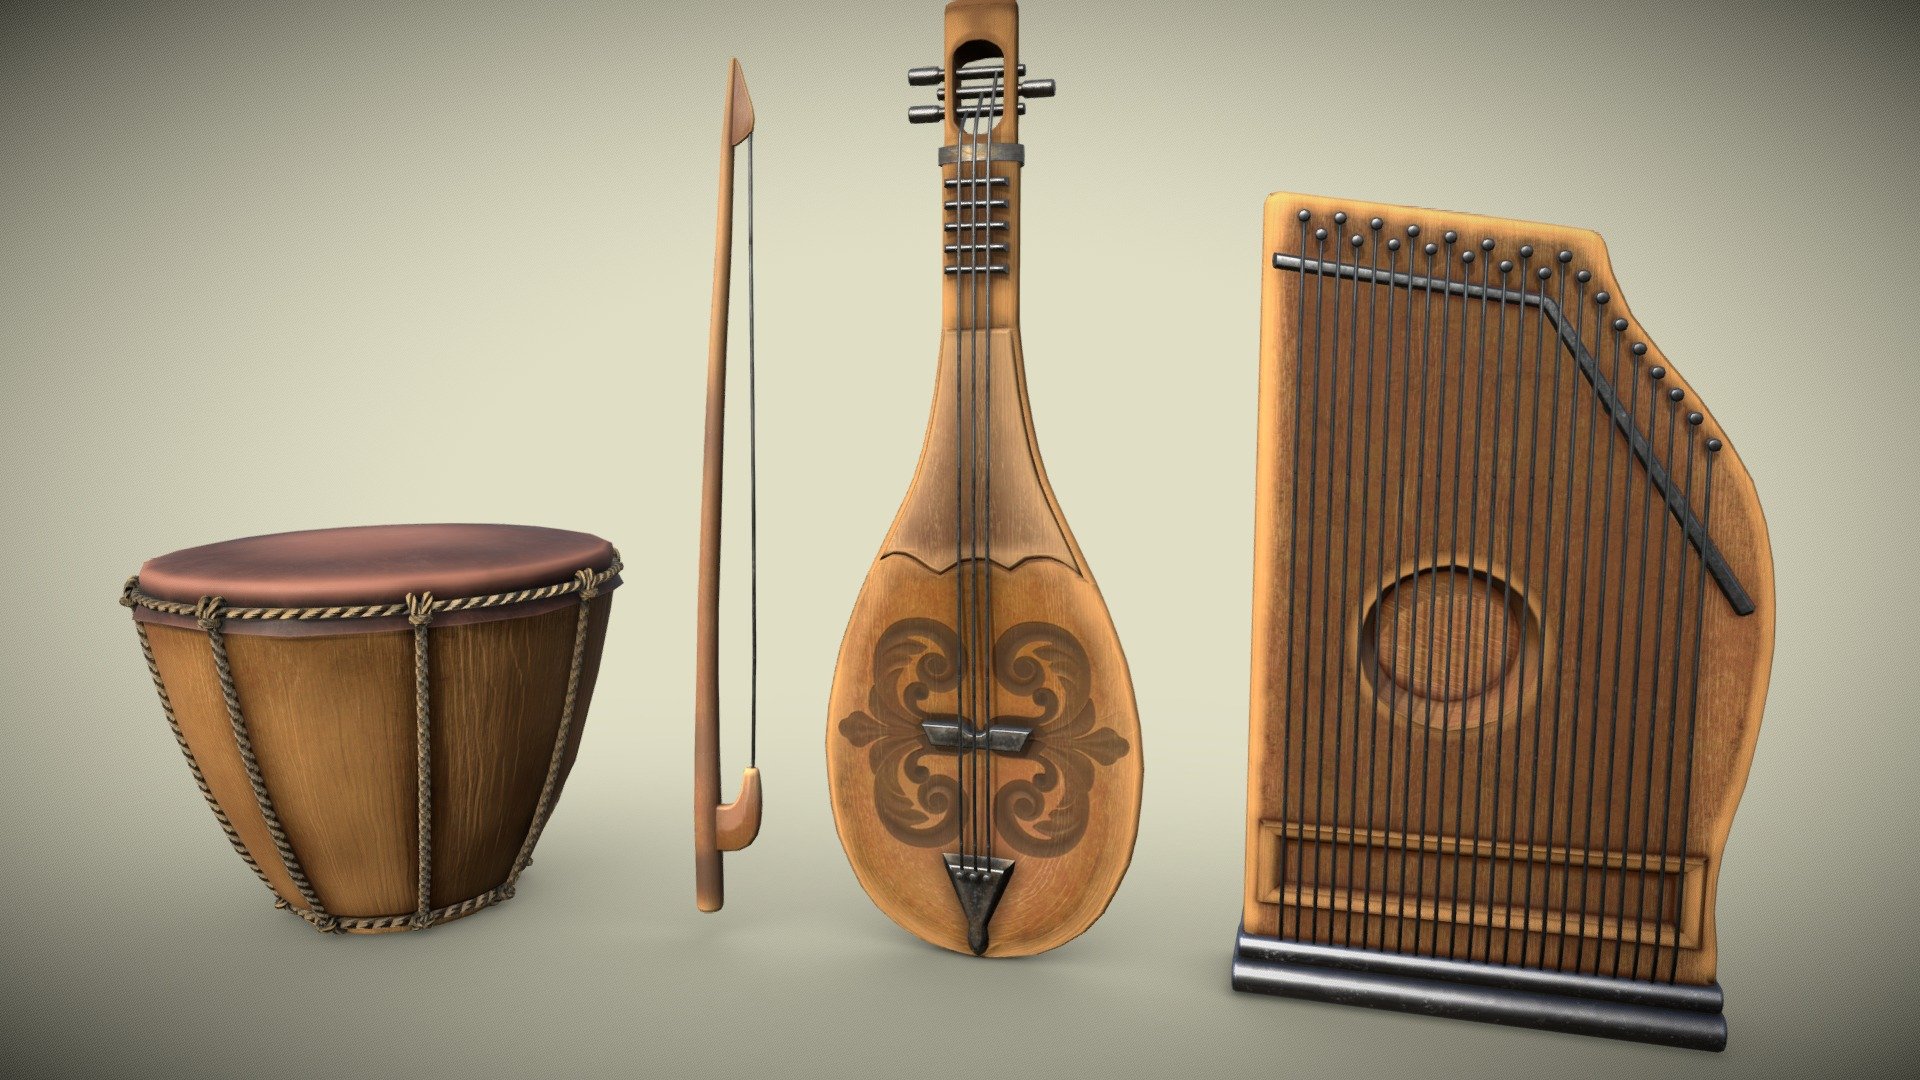 Musical instruments PBR game ready Low-poly 3D model Drum 
Polygons 6752
 Vertices 6798 zither 
Polygons 2991 
Vertices 2963 zebec
 Polygons 2997 
Vertices 3105 - Musical instruments PBR game ready 3D model Low- - Buy Royalty Free 3D model by Svetlana07 3d model